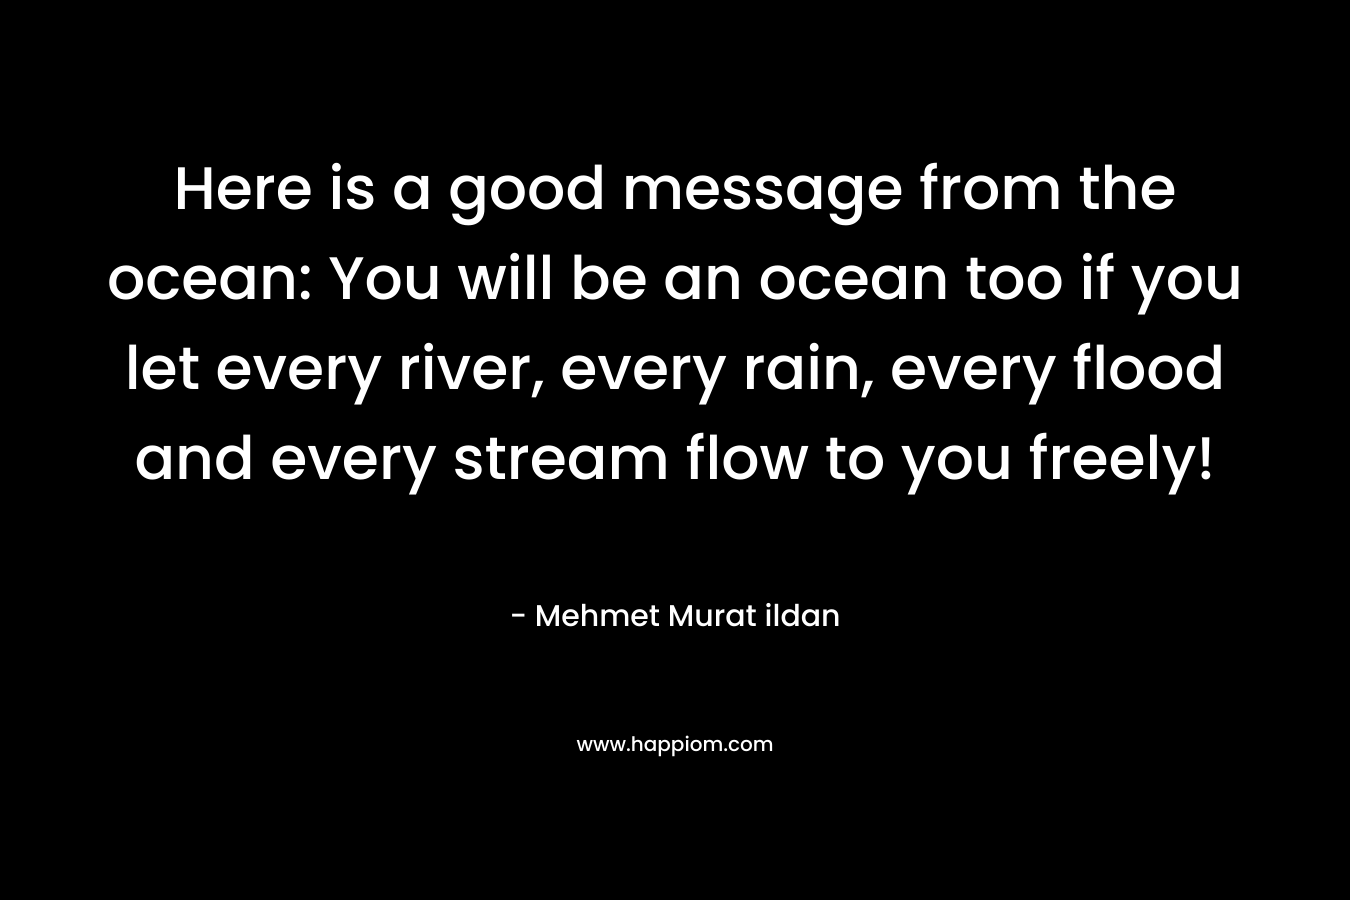 Here is a good message from the ocean: You will be an ocean too if you let every river, every rain, every flood and every stream flow to you freely! – Mehmet Murat ildan